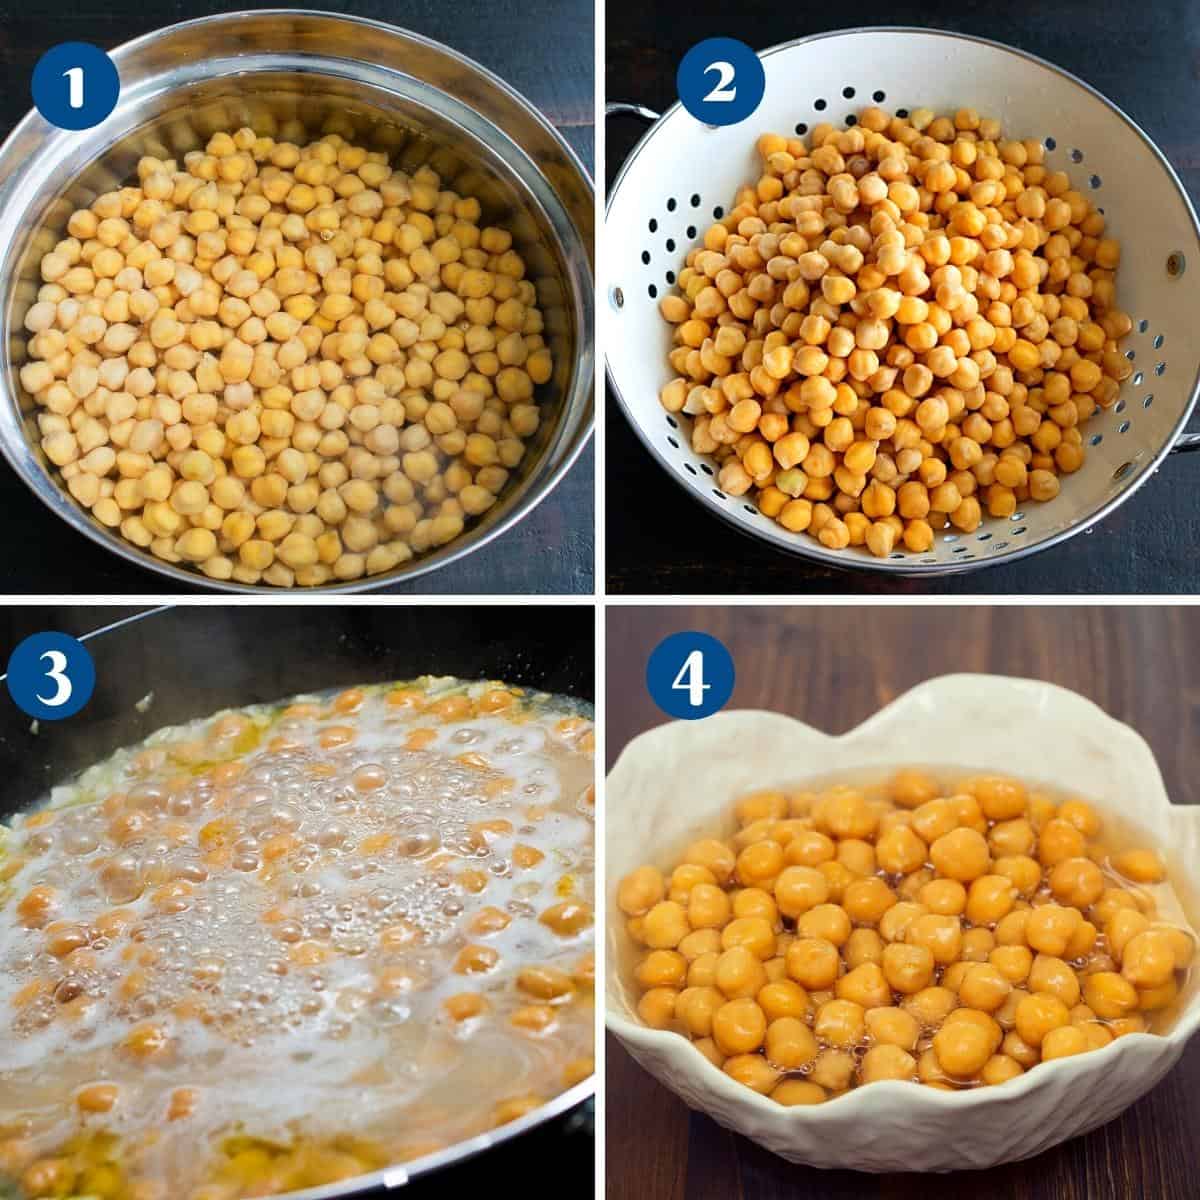 Progress pictures collage how to make hummus from scratch with dry chickpeas.